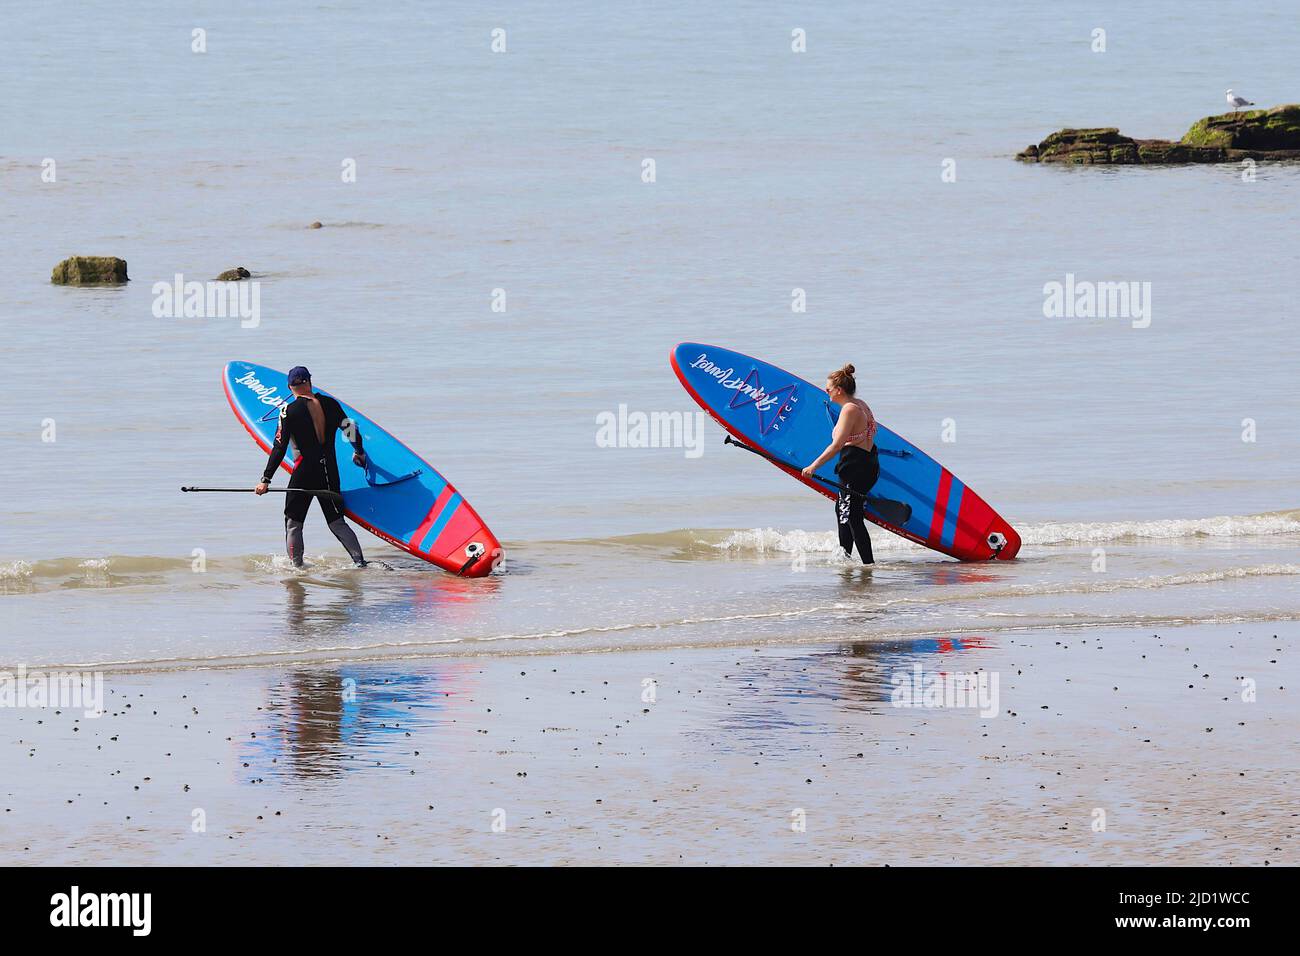 Hastings, East Sussex, UK. 17 Jun, 2022. UK Weather: Very hot and sunny at the seaside town of Hastings in East Sussex as Brits enjoy the very hot weather today that is expected to reach 34c in some parts of the UK. A couple of paddle boarders head out to sea. Photo Credit: Paul Lawrenson /Alamy Live News Stock Photo